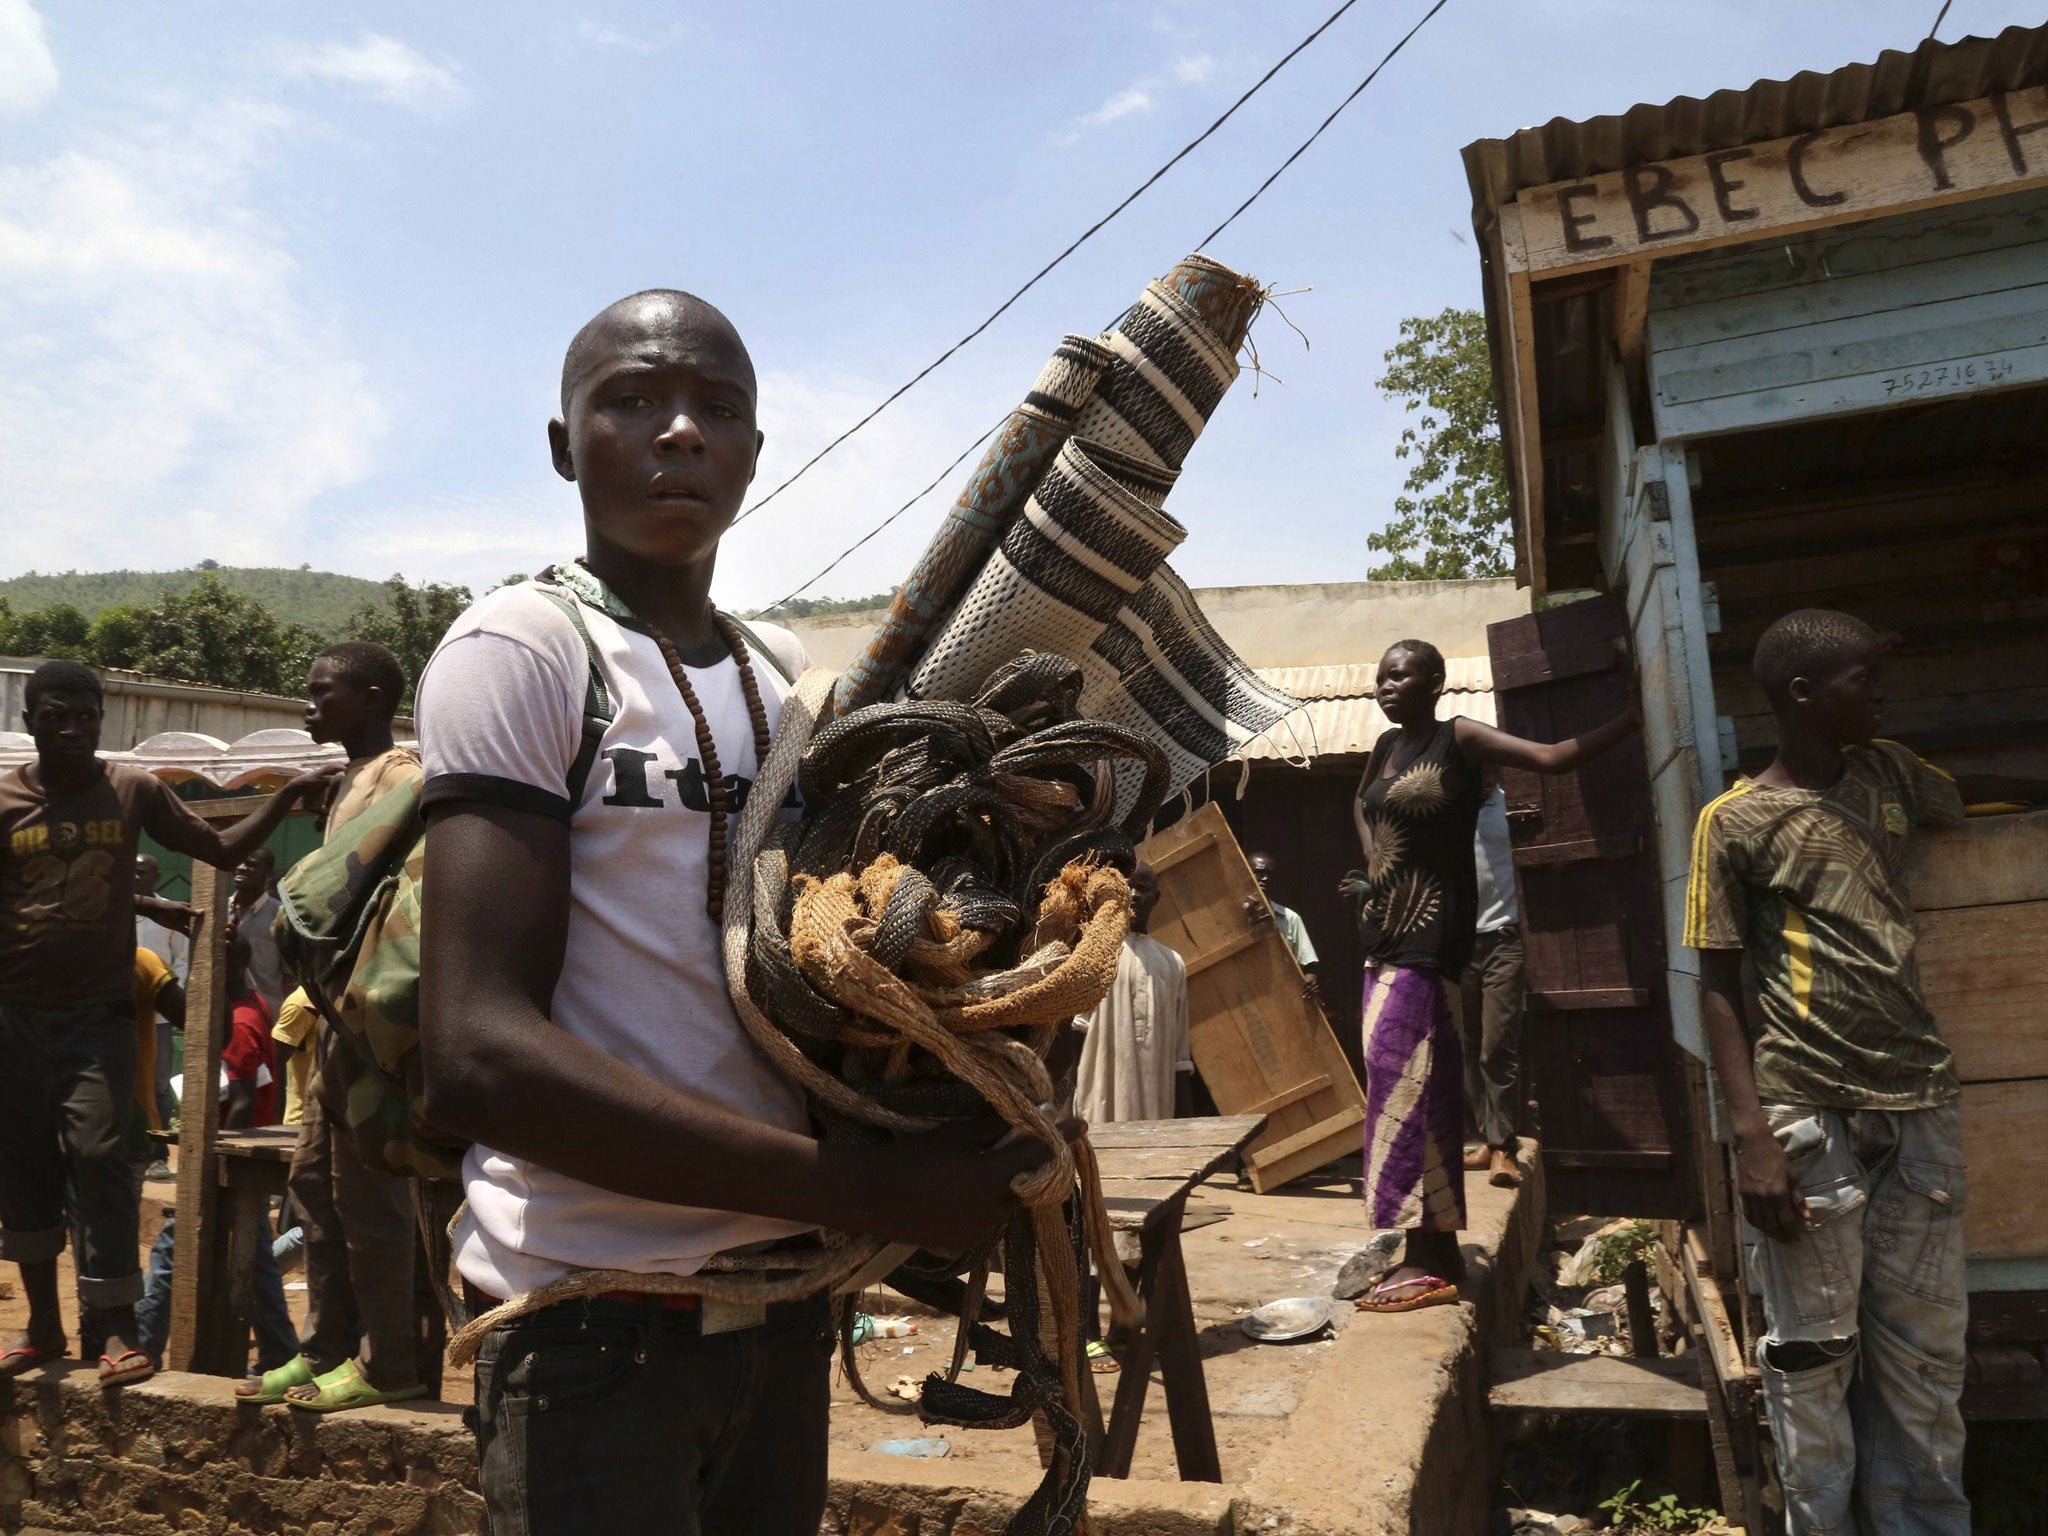 A Christian man carries property left behind by the Muslim community who were evacuated from the PK12 neighbourhood in Bangui. The relocation involves moving Muslims who have sheltered from sectarian violence for months in the PK12 neighbourhood, to the n